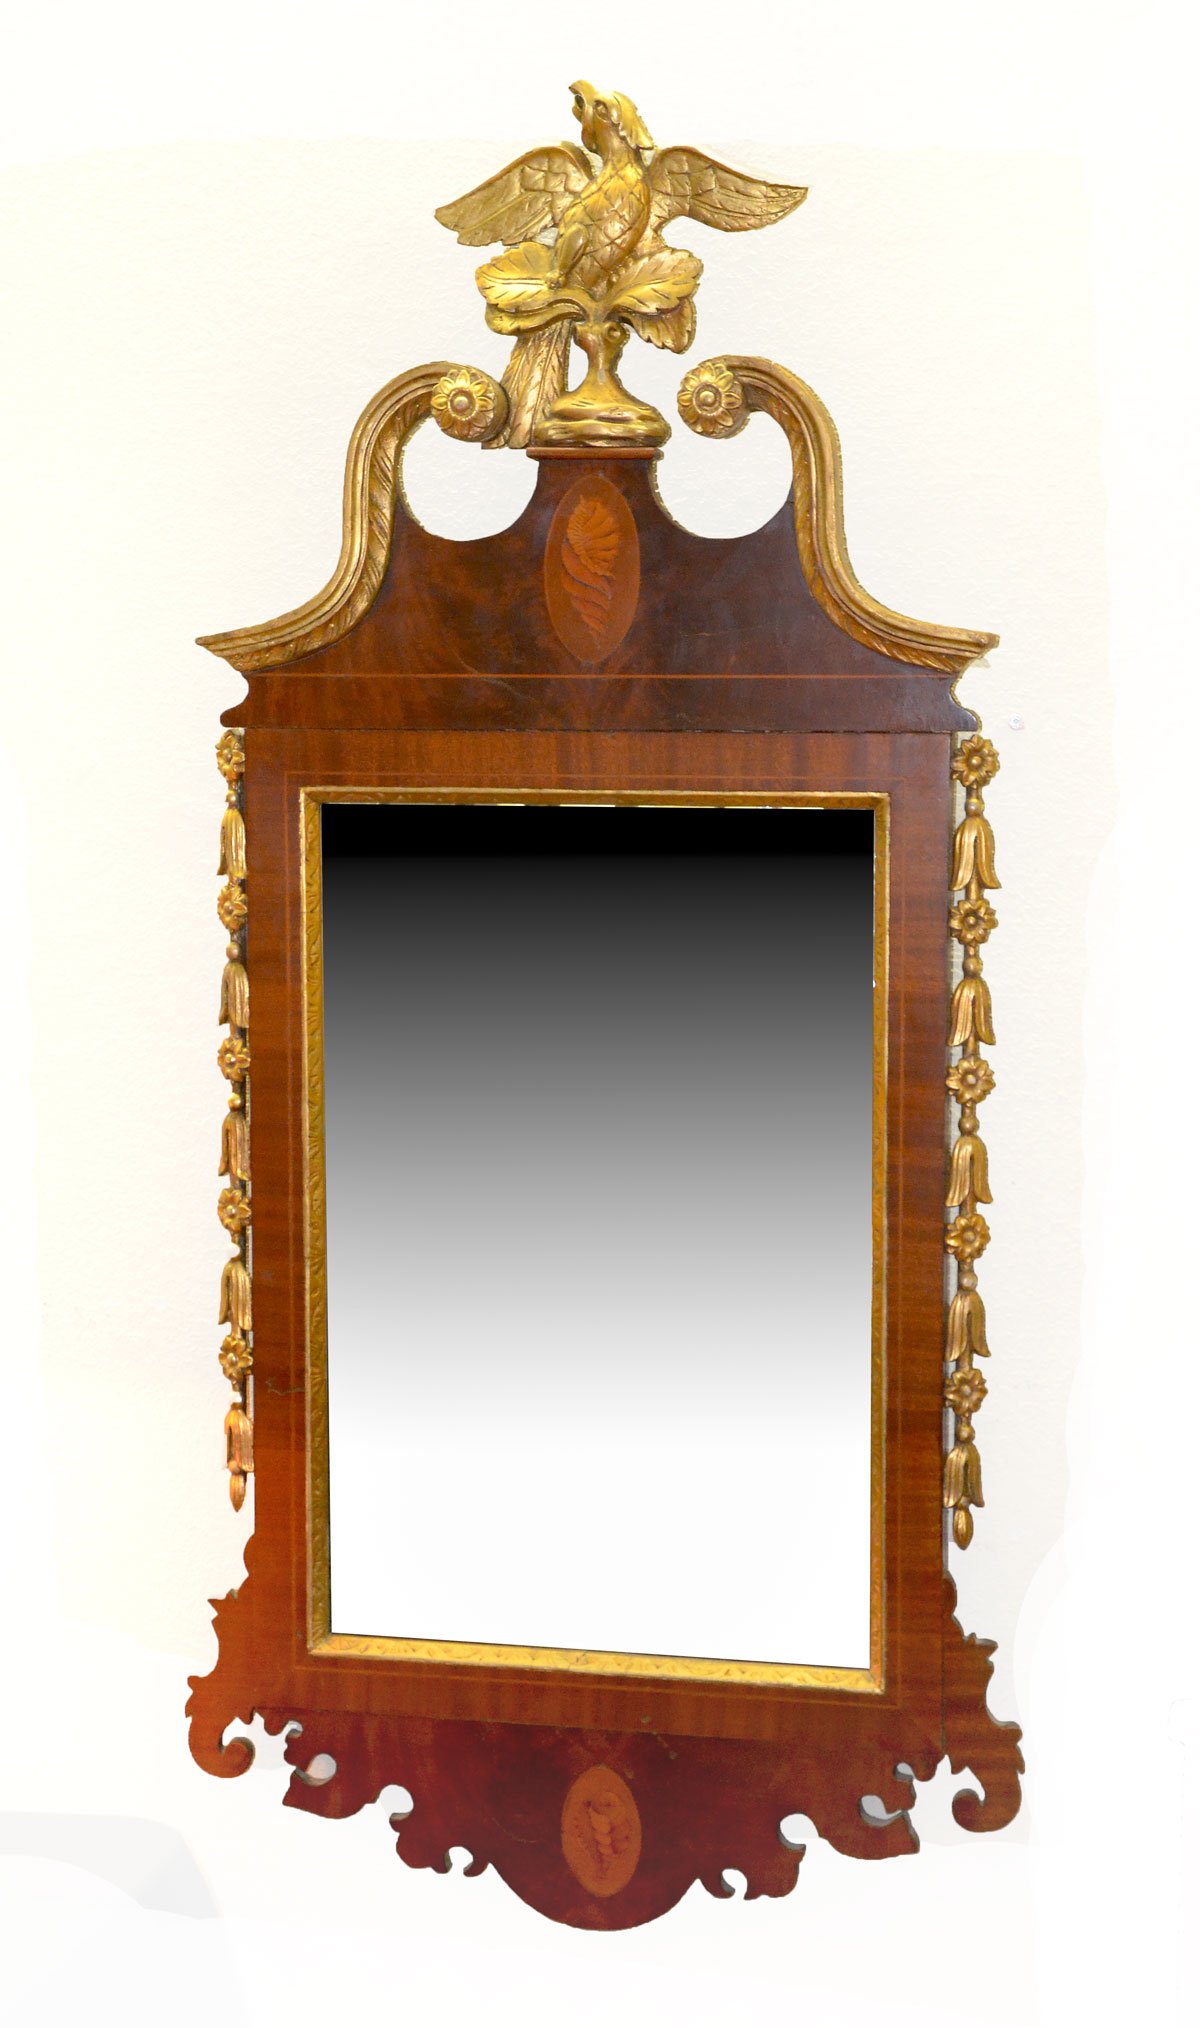 CHIPPENDALE MIRROR WITH EAGLE CREST: